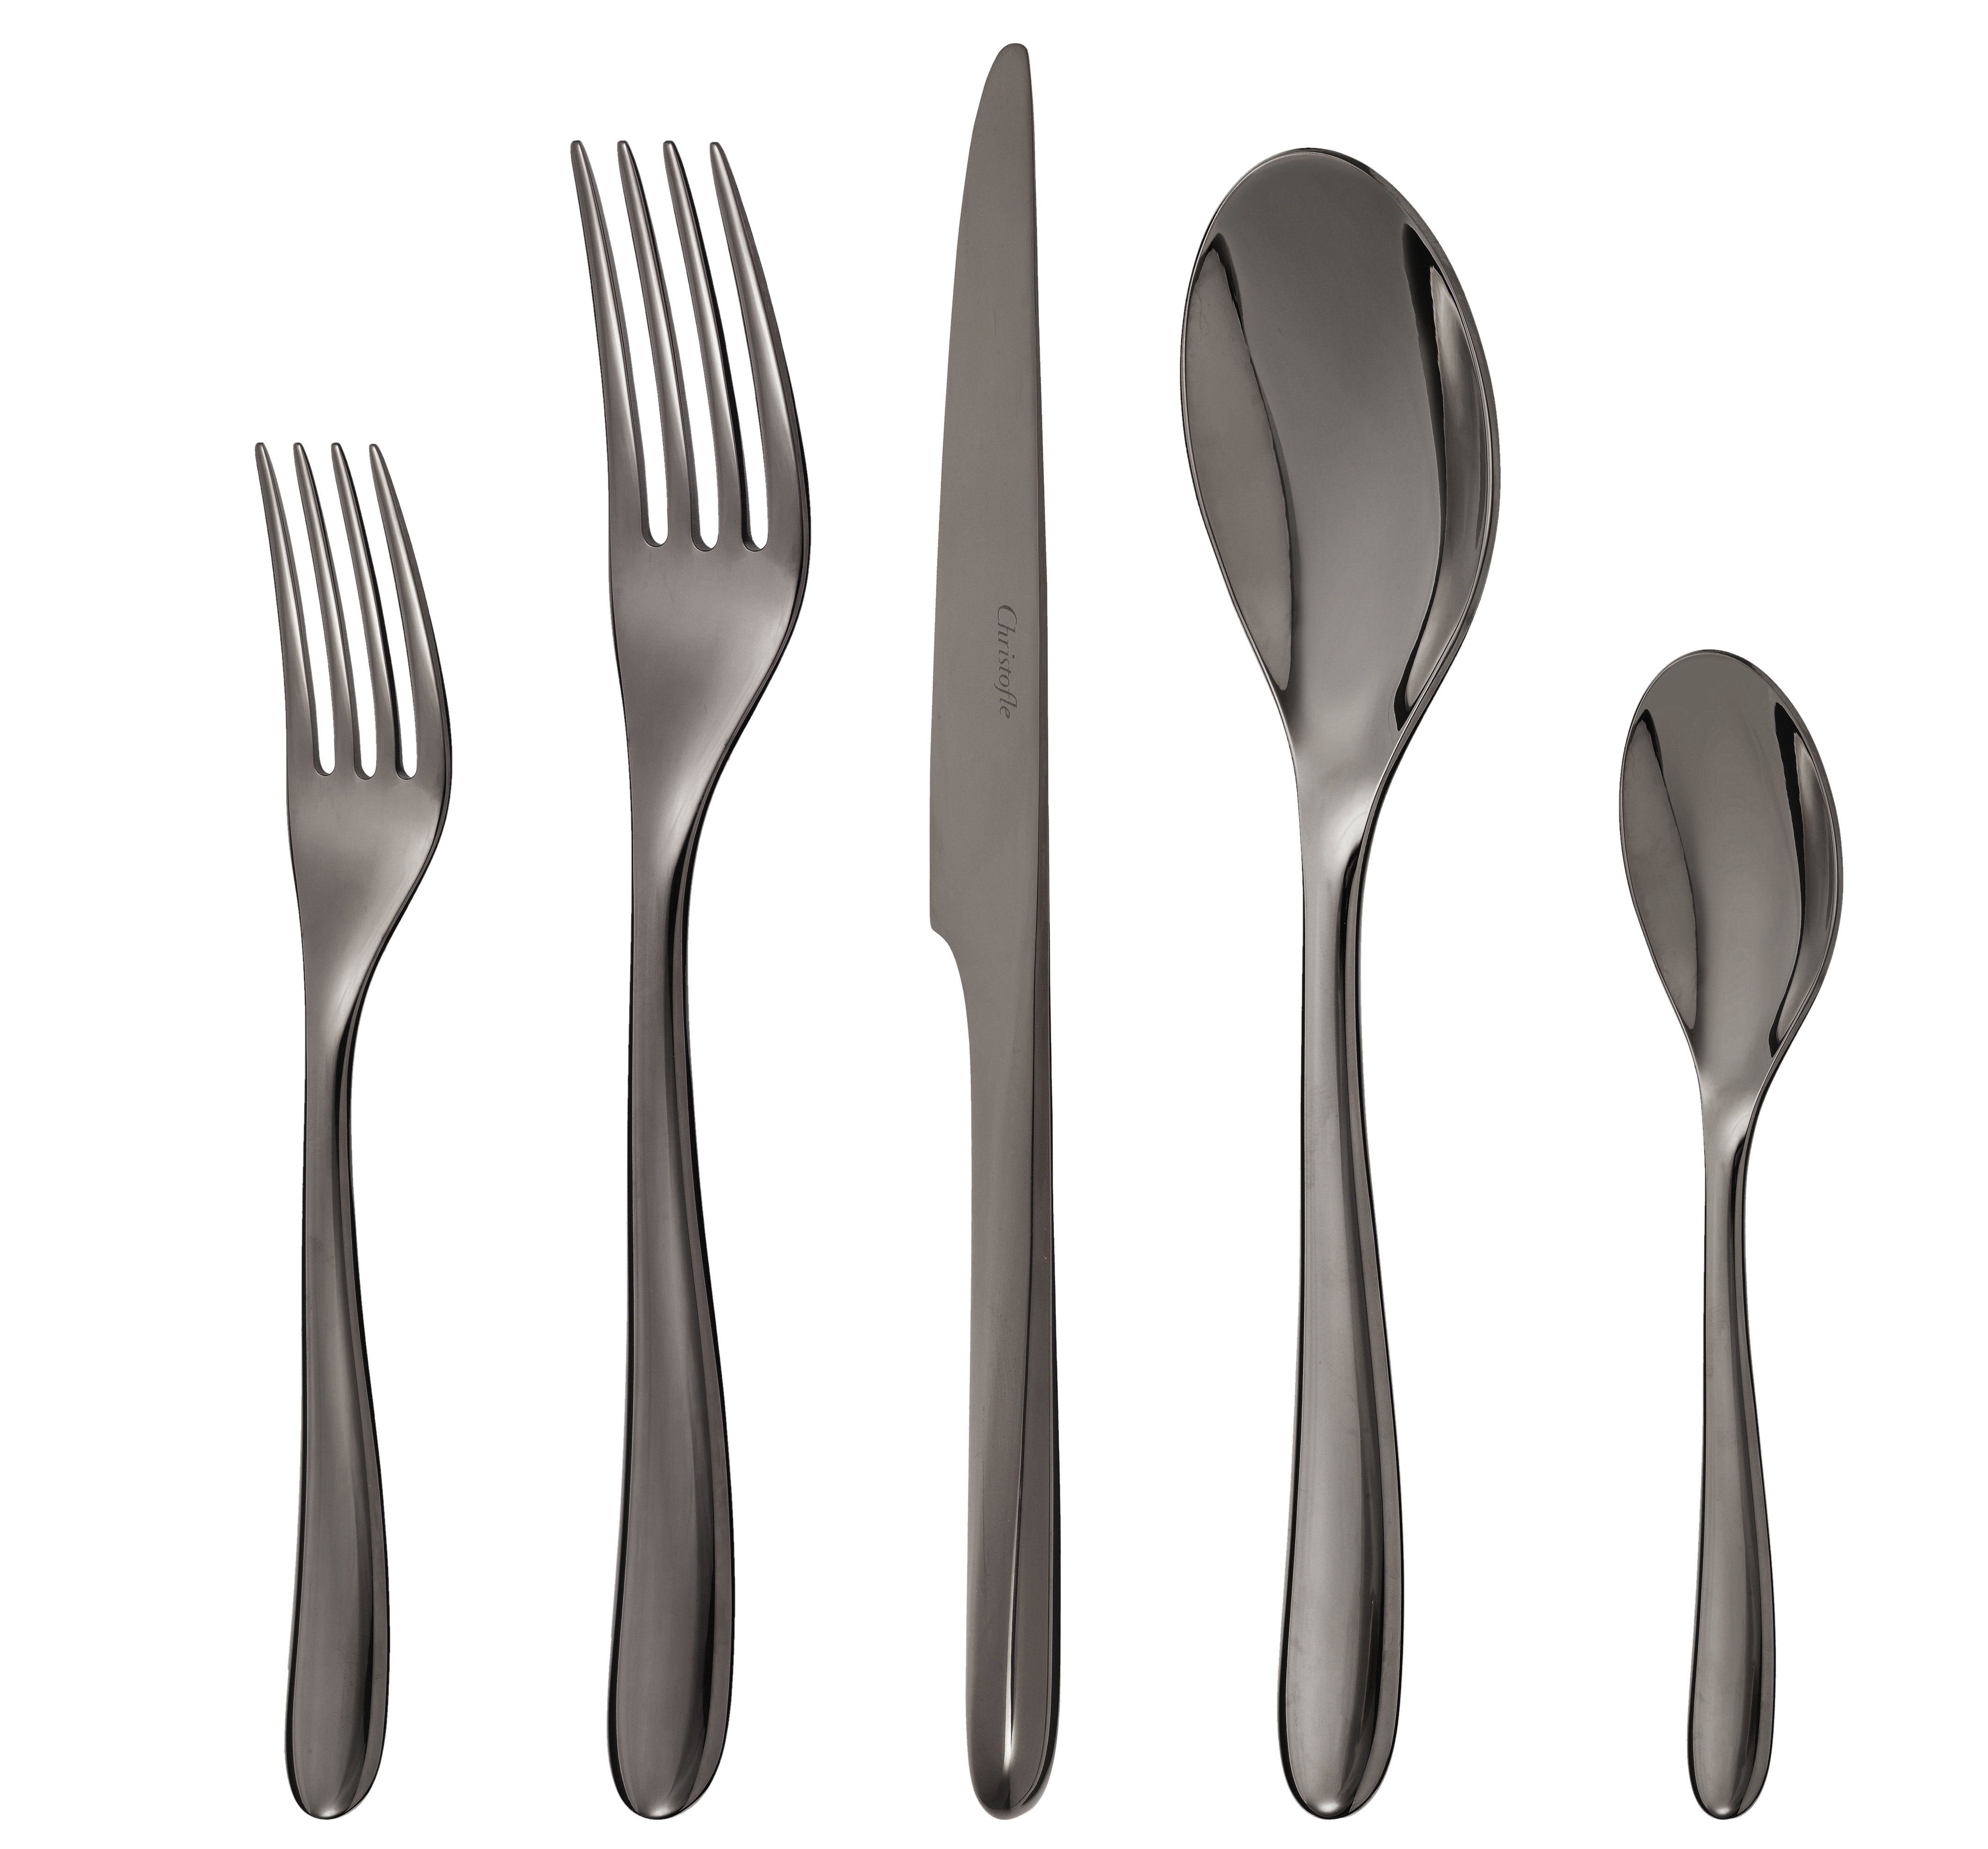 Black Stainless Steel 5-Piece Place Setting L'Ame de Christofle